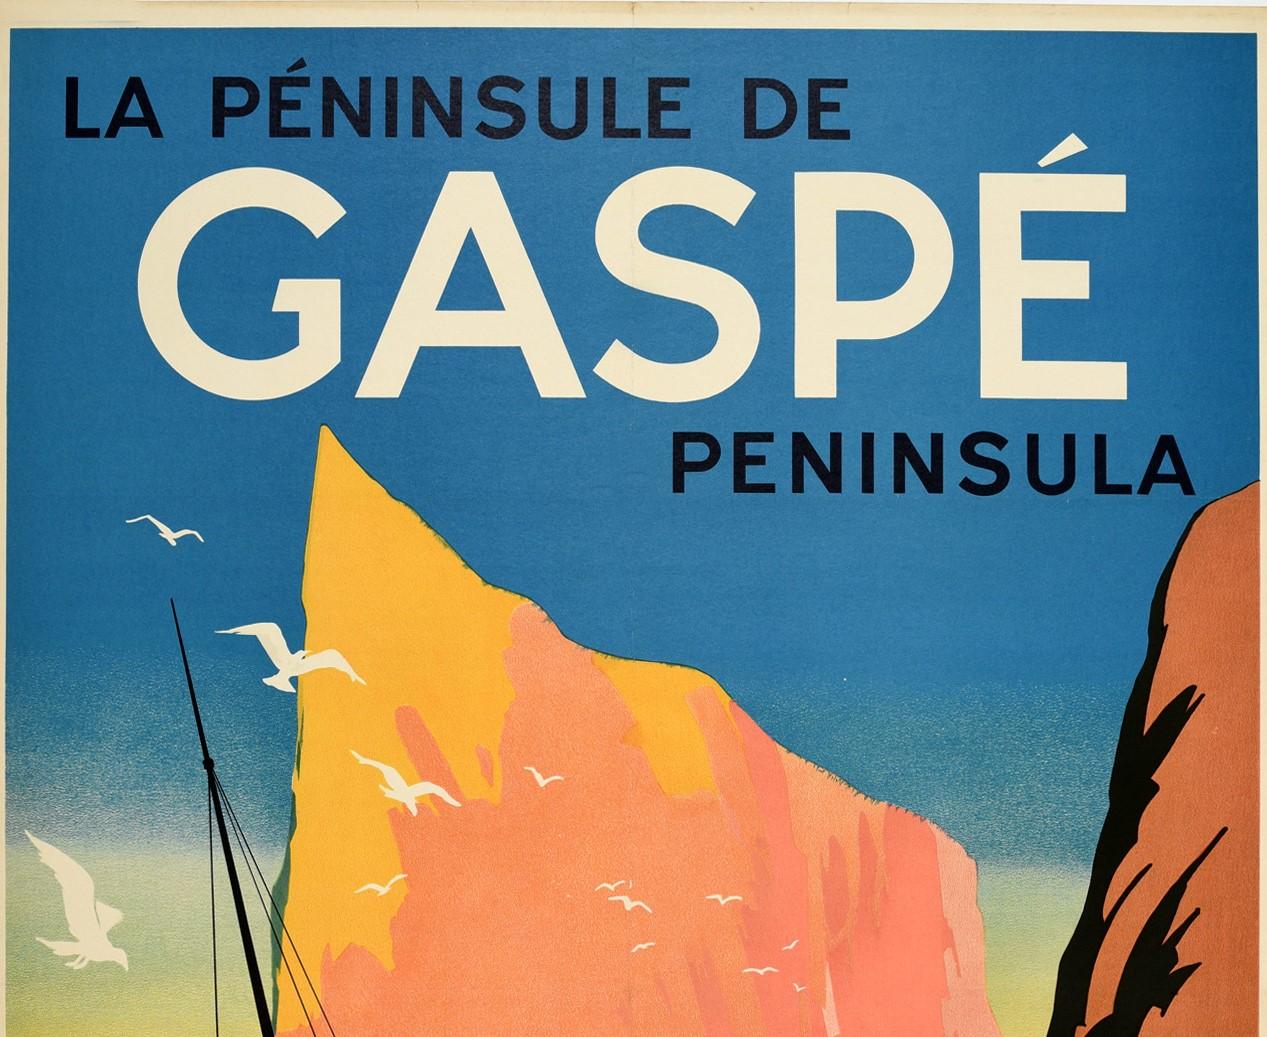 Original vintage travel poster for the Gaspe Peninsula / La Peninsule De Gaspe featuring a great illustration of a person leaning against a sailing boat anchored on a beach with seagulls flying overhead and colourful cliff edges across the calm sea